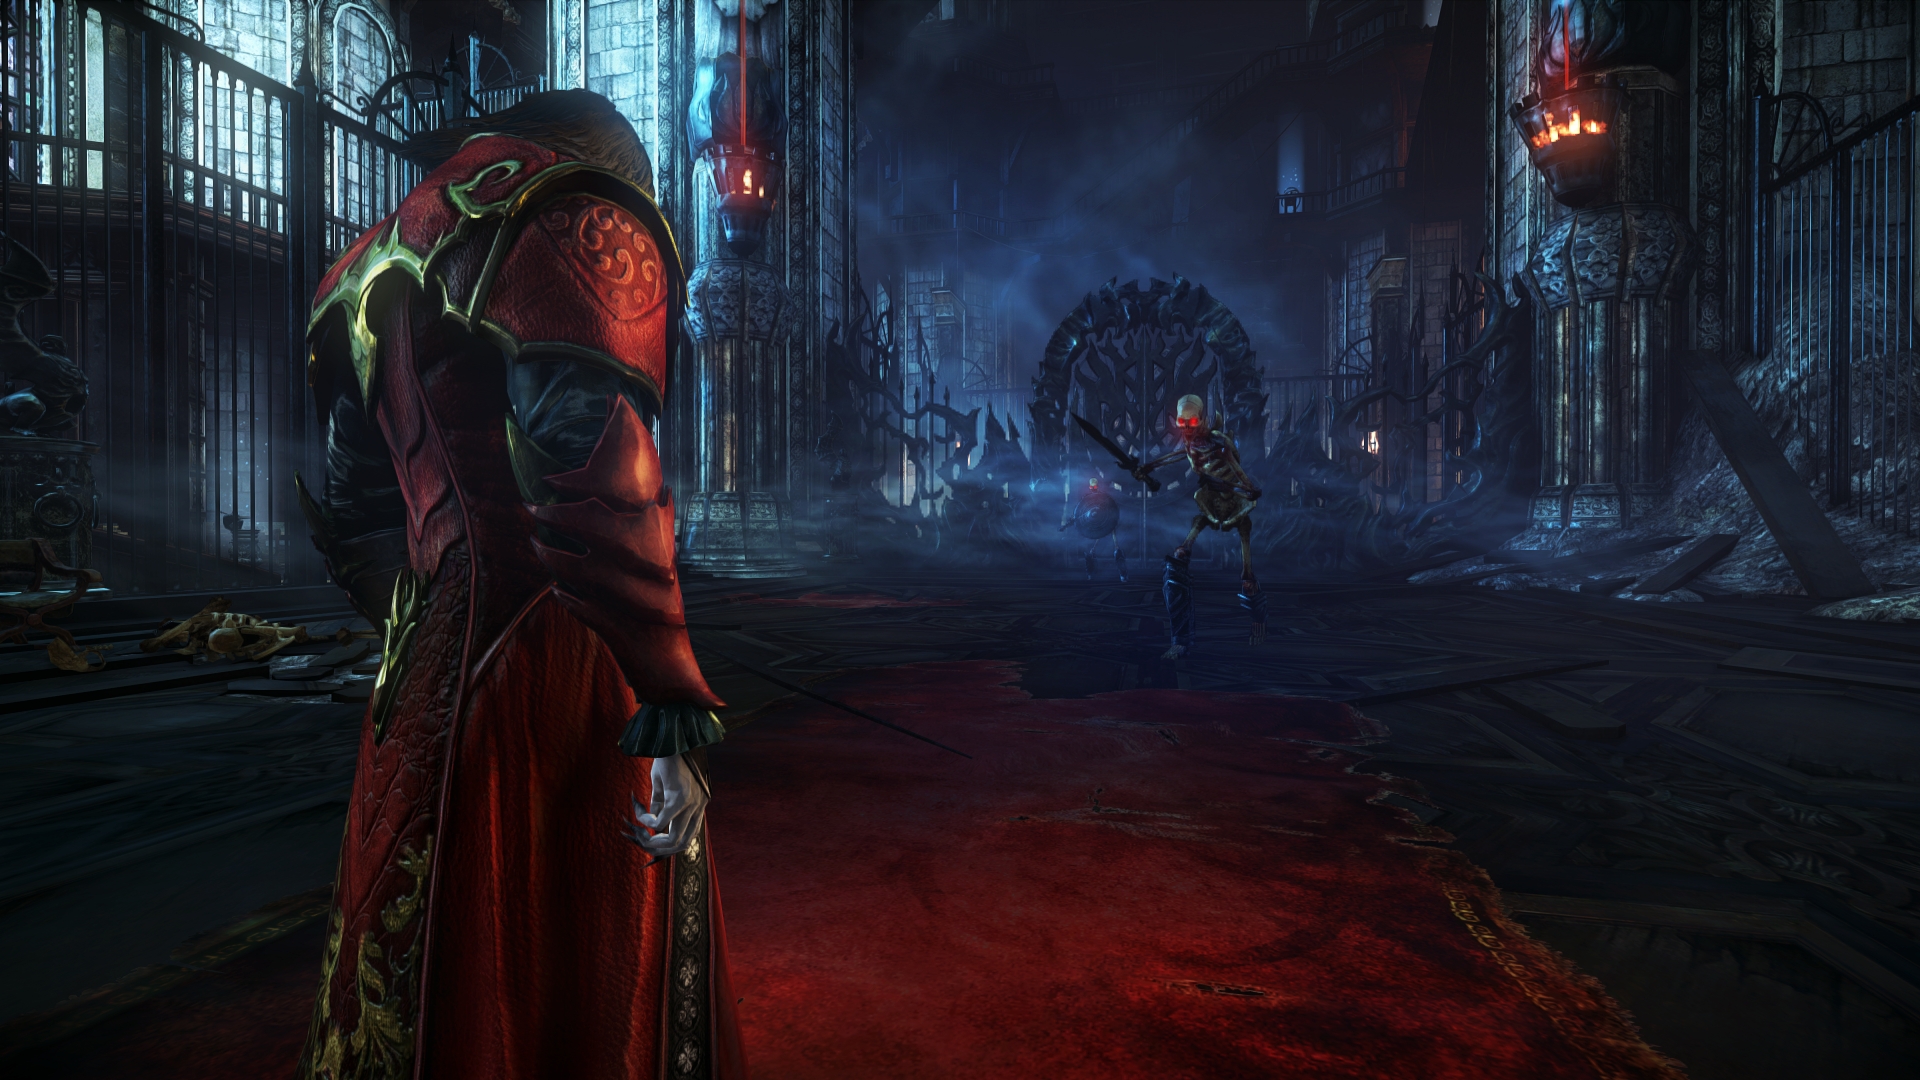 “Castlevania: Lords of Shadow 2” DLC Revealed - Release Date Set for March 25th